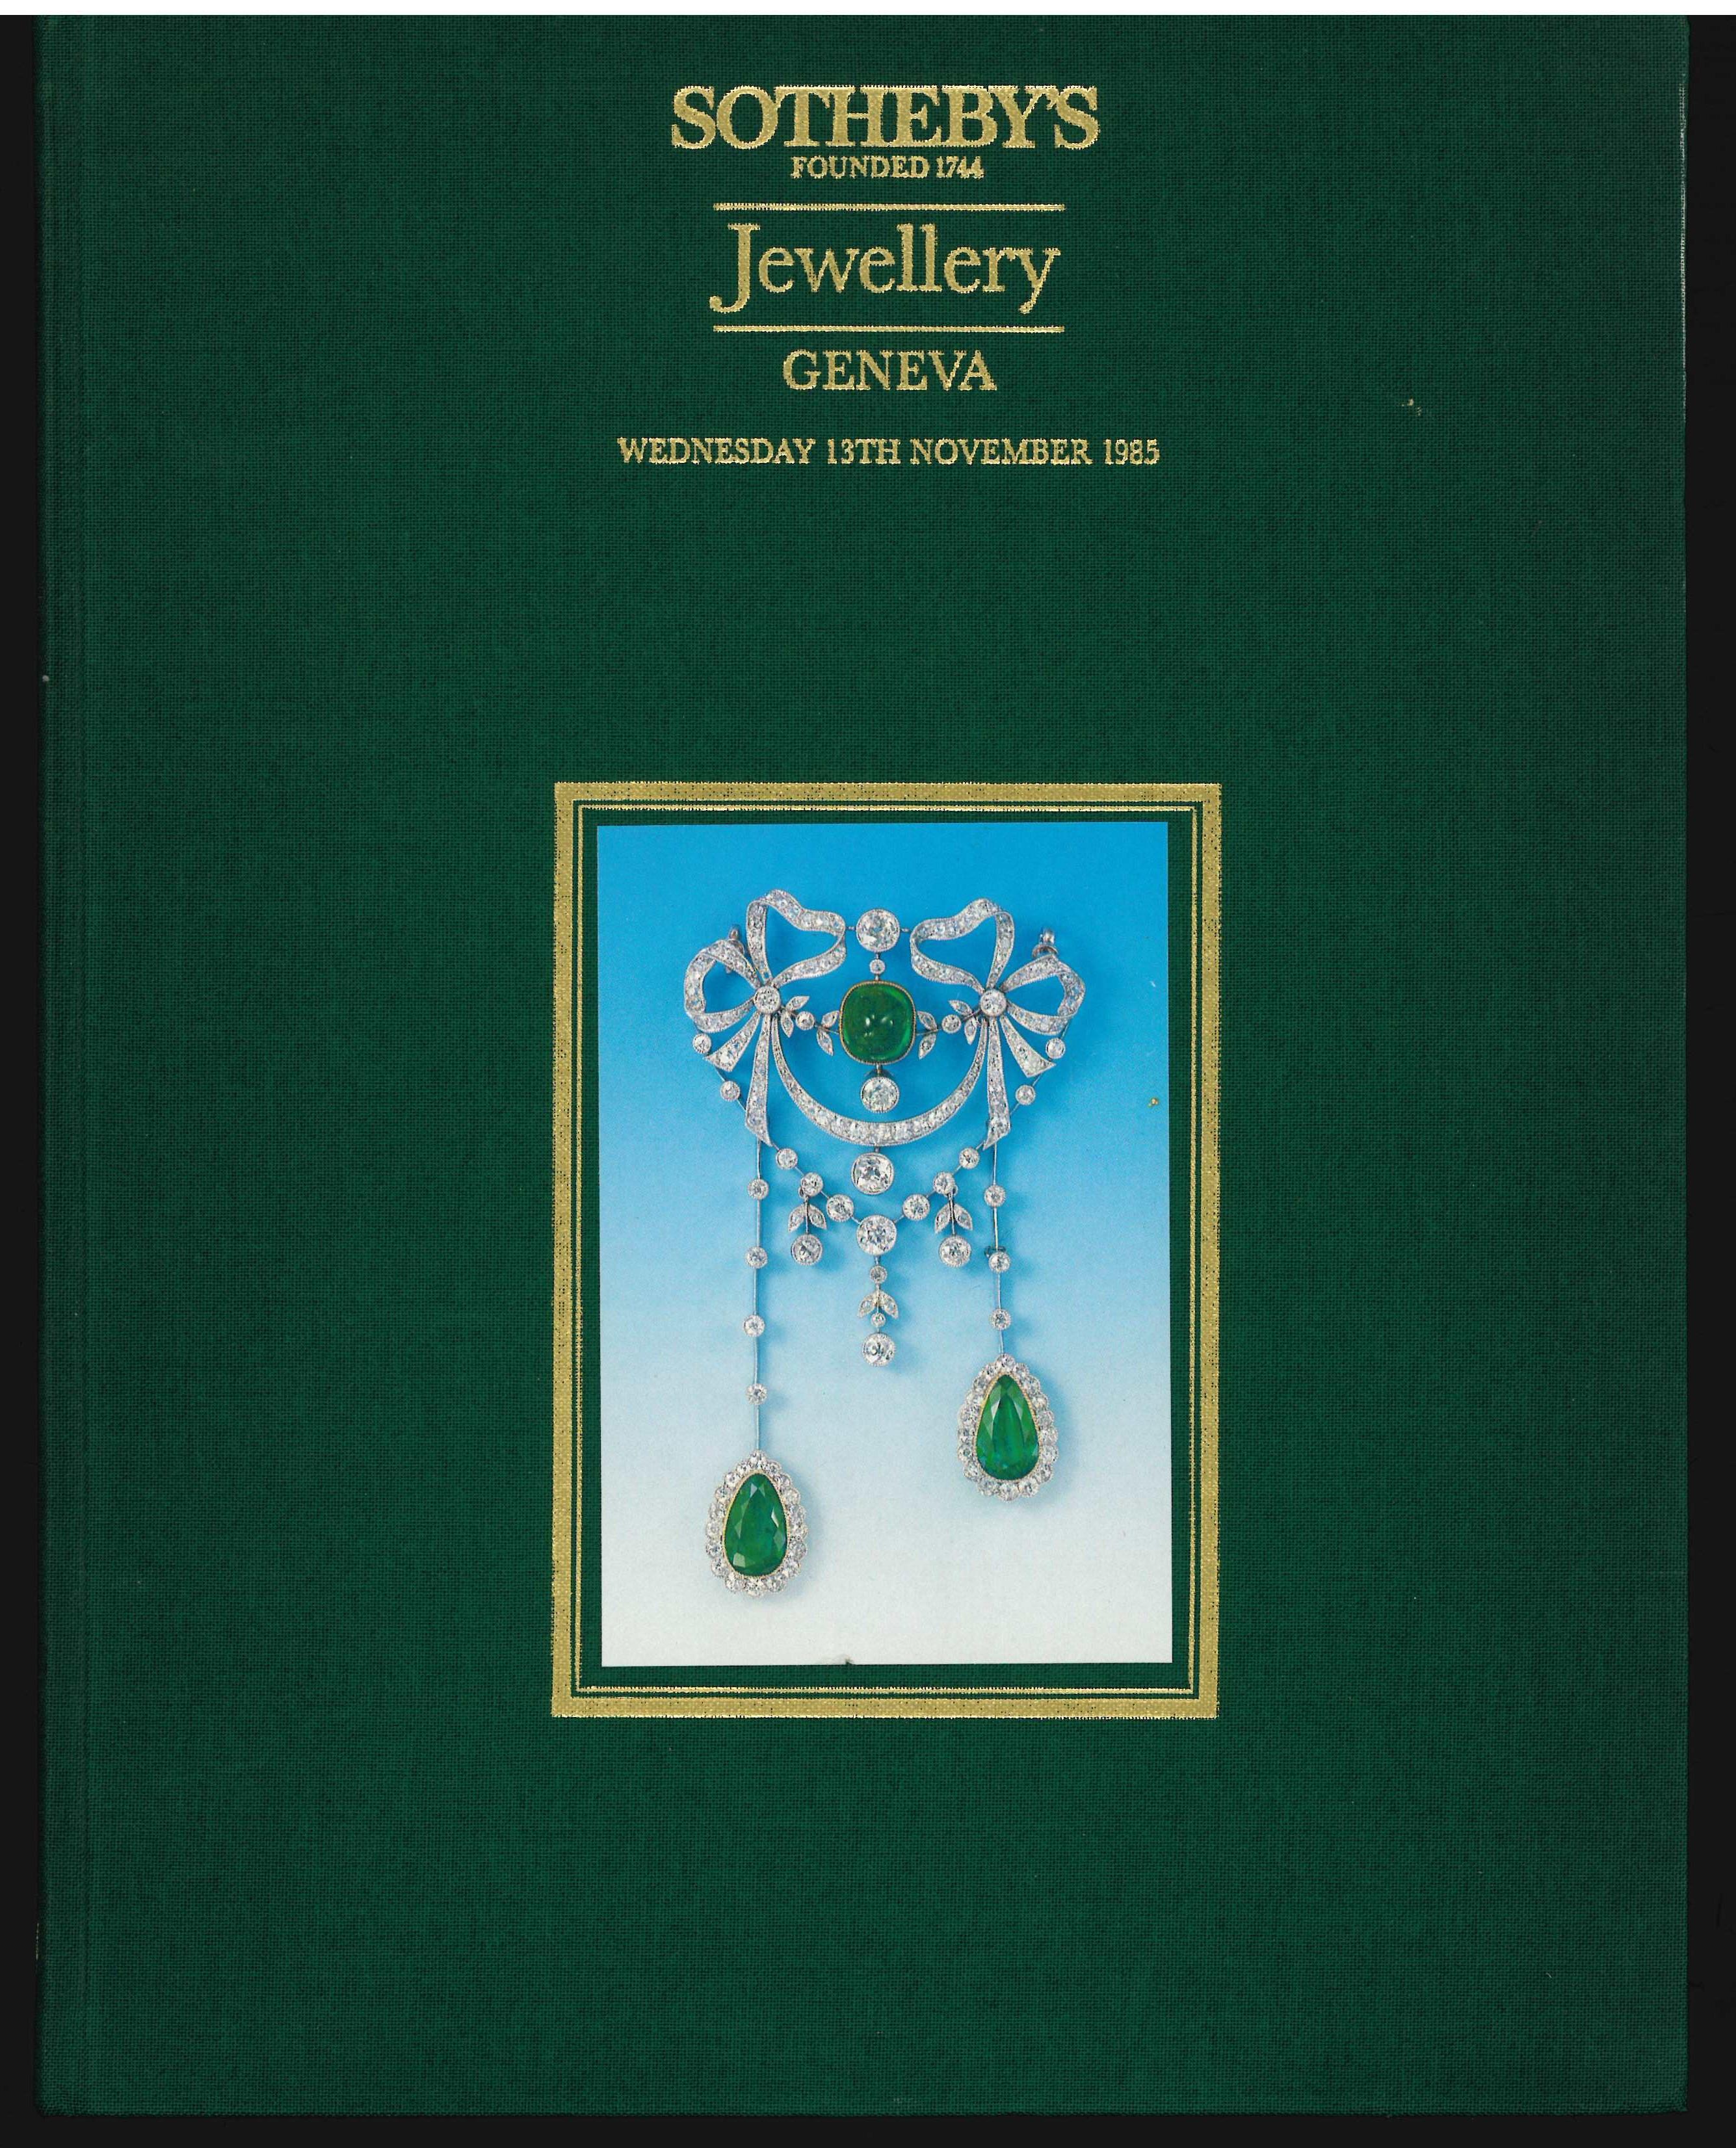 Women's or Men's 6 Sotheby's Jewellery Sale Catalogues Dating from 1980s